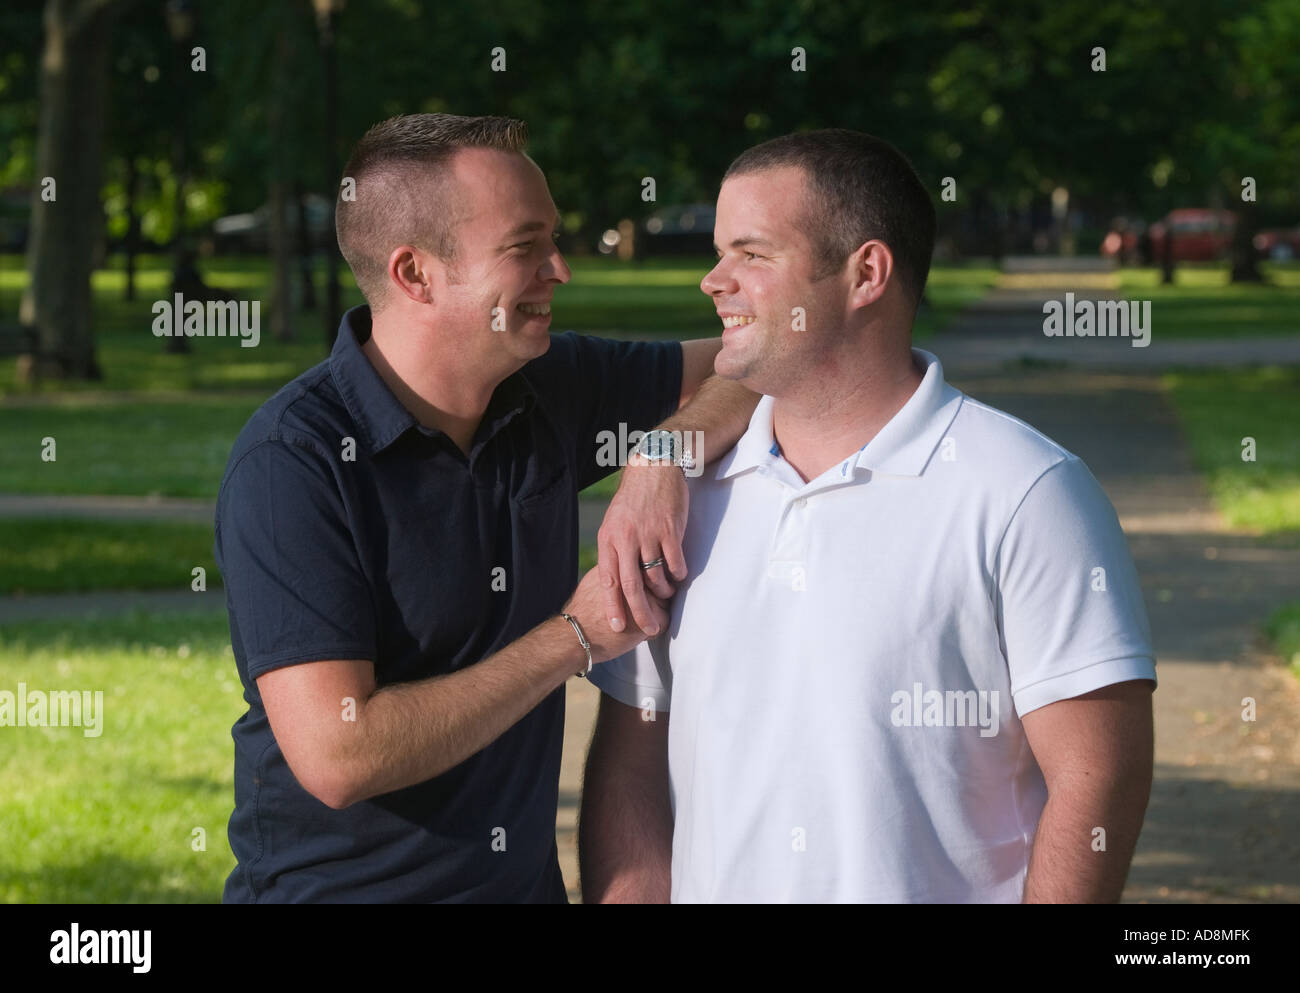 Male Gay married couple portrait Stock Photo